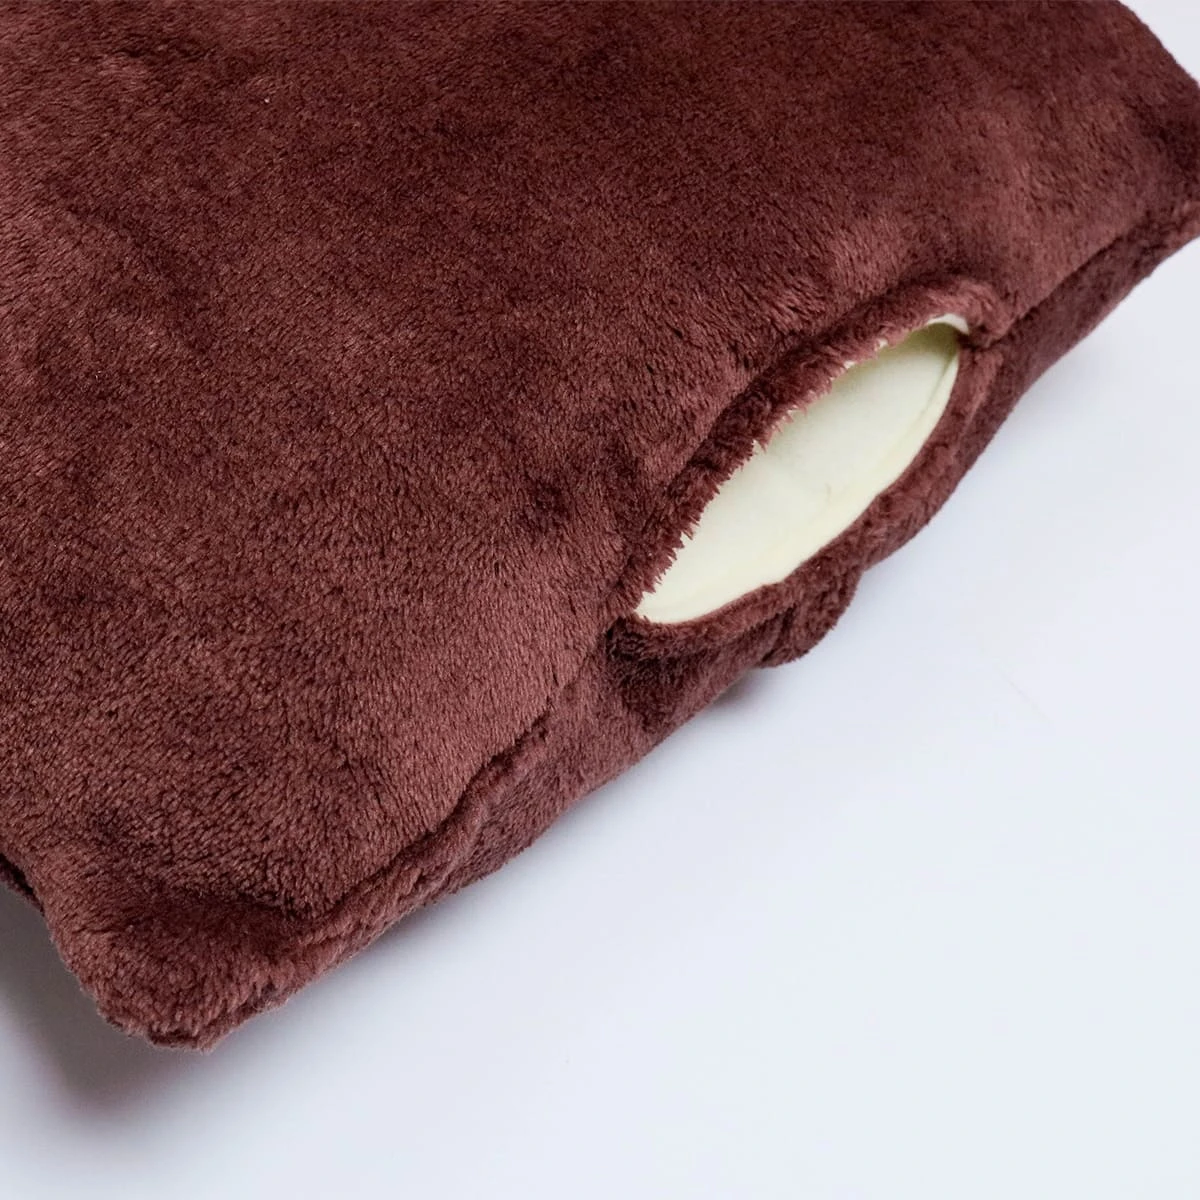 Ton Embroidery Flannel Hand Warmer Pillow Blanket (Red Brown)